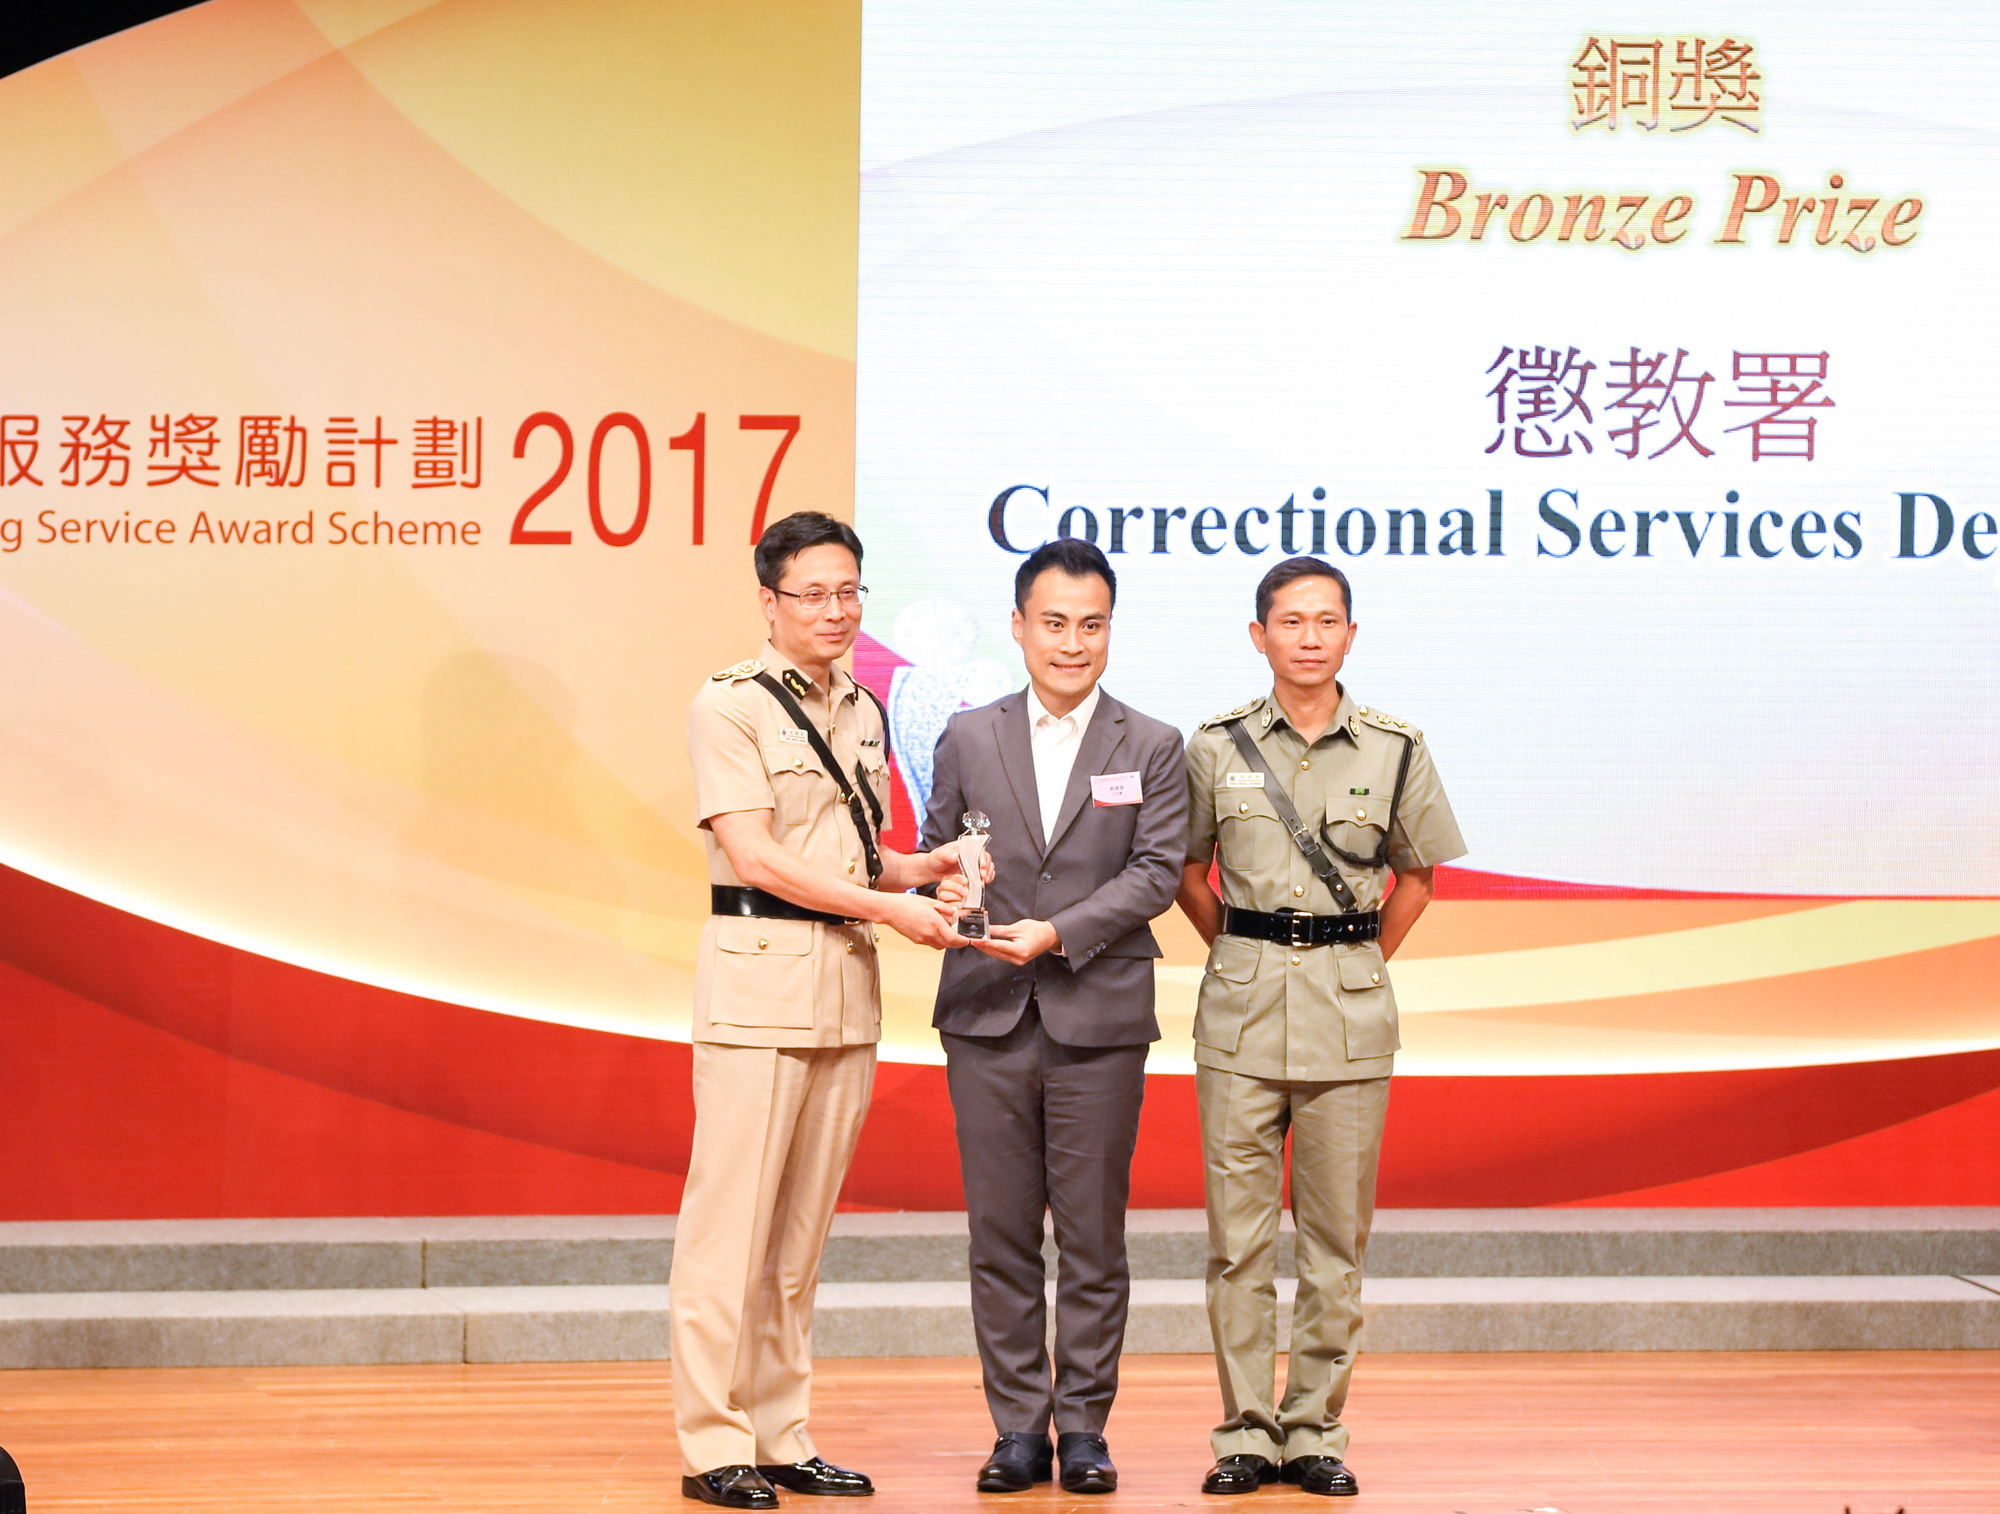 Photo 1 - The Department received Bronze Prize of the Departmental Service Enhancement Award (Large Department Category) 2017.